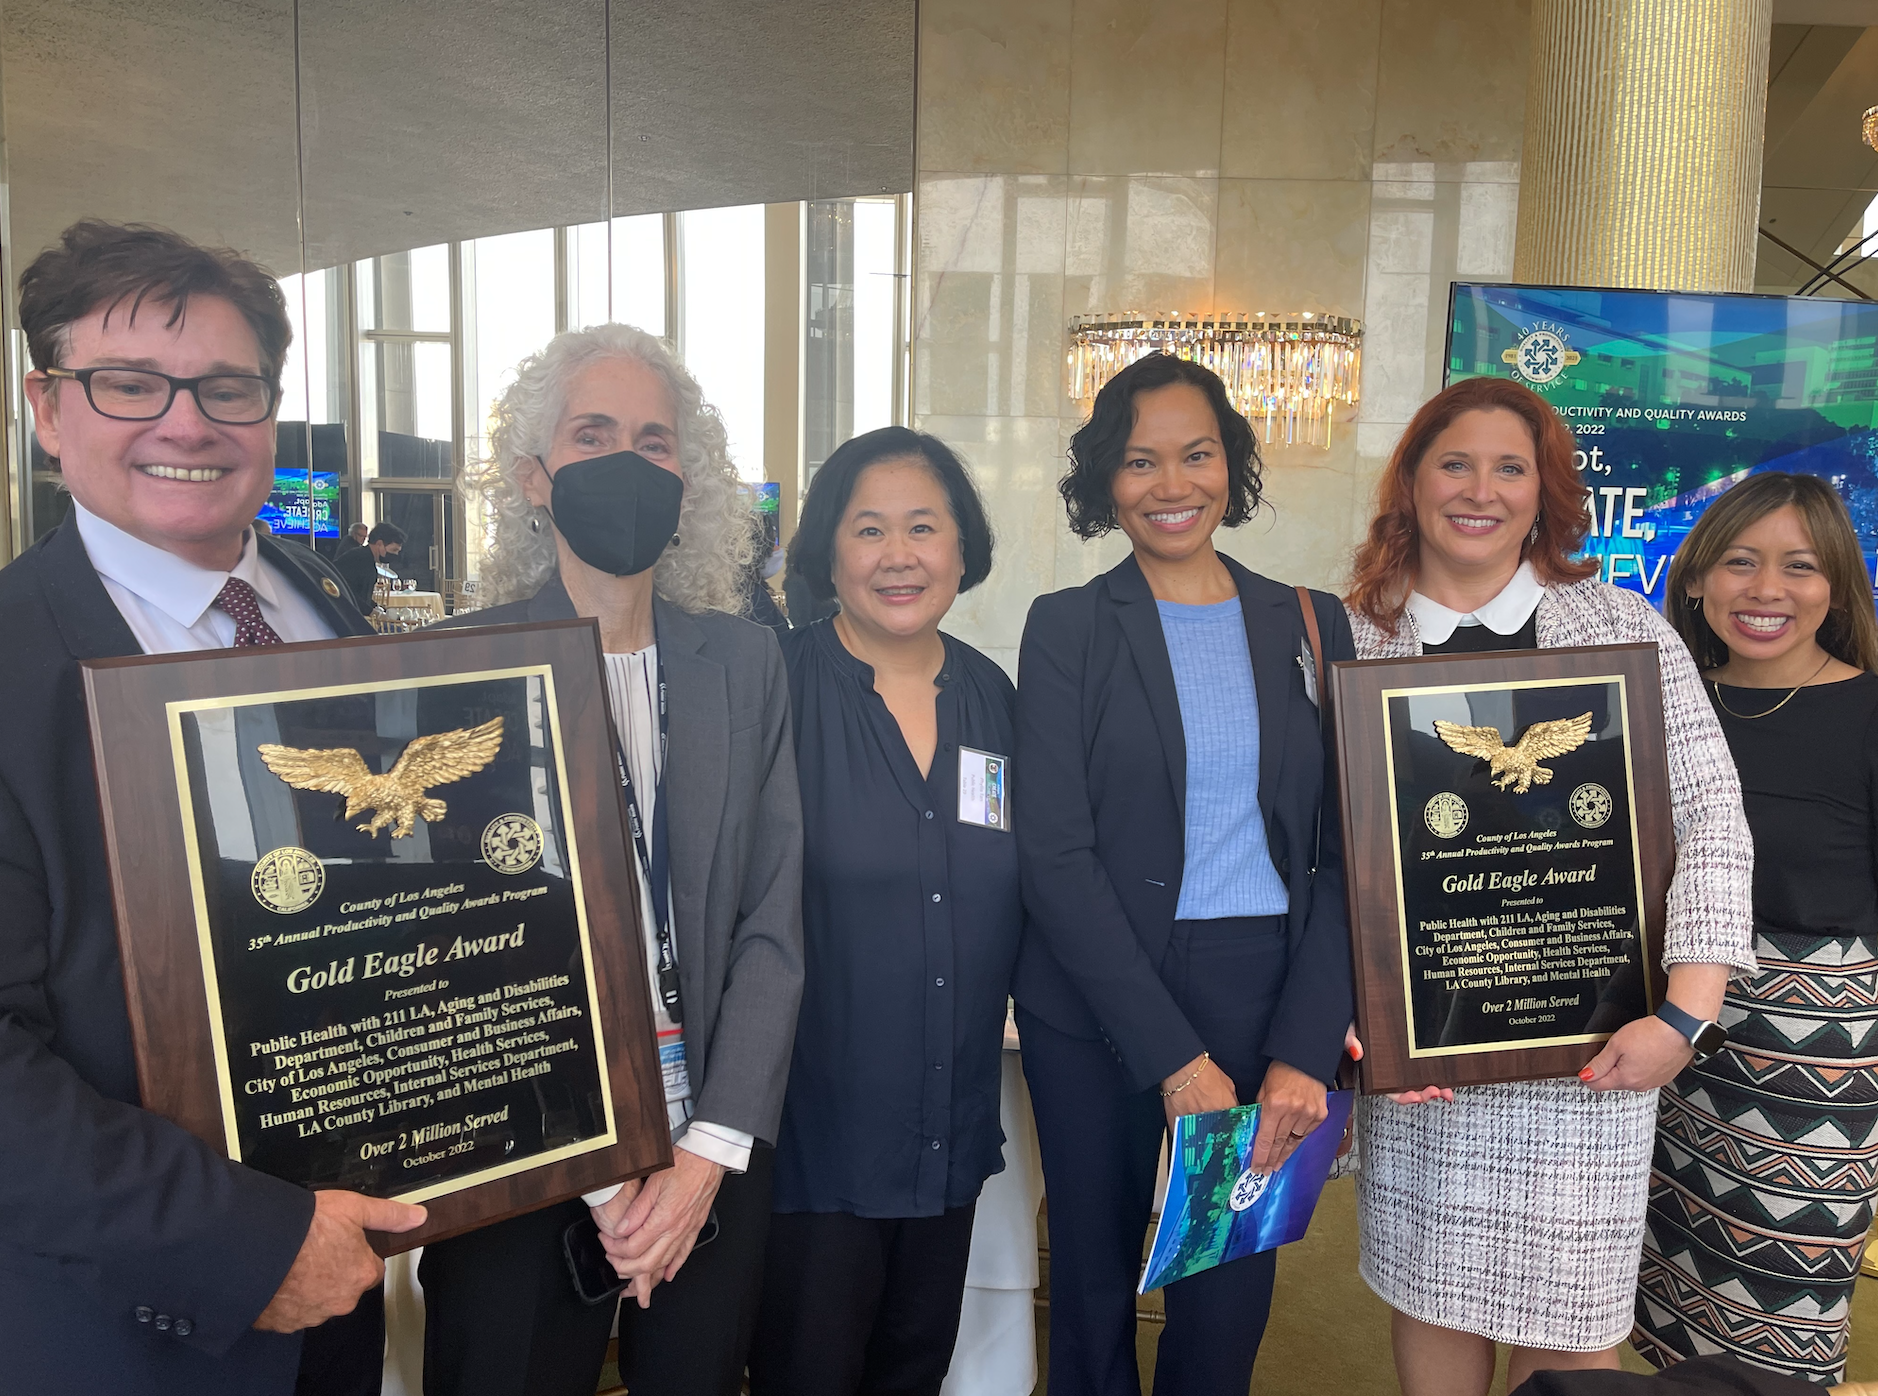  211 LA staff and Public Health Director Barbara Ferrer (2nd from left) hold the Gold Eagle awards received at the Productivity and Quality Awards ceremony. 